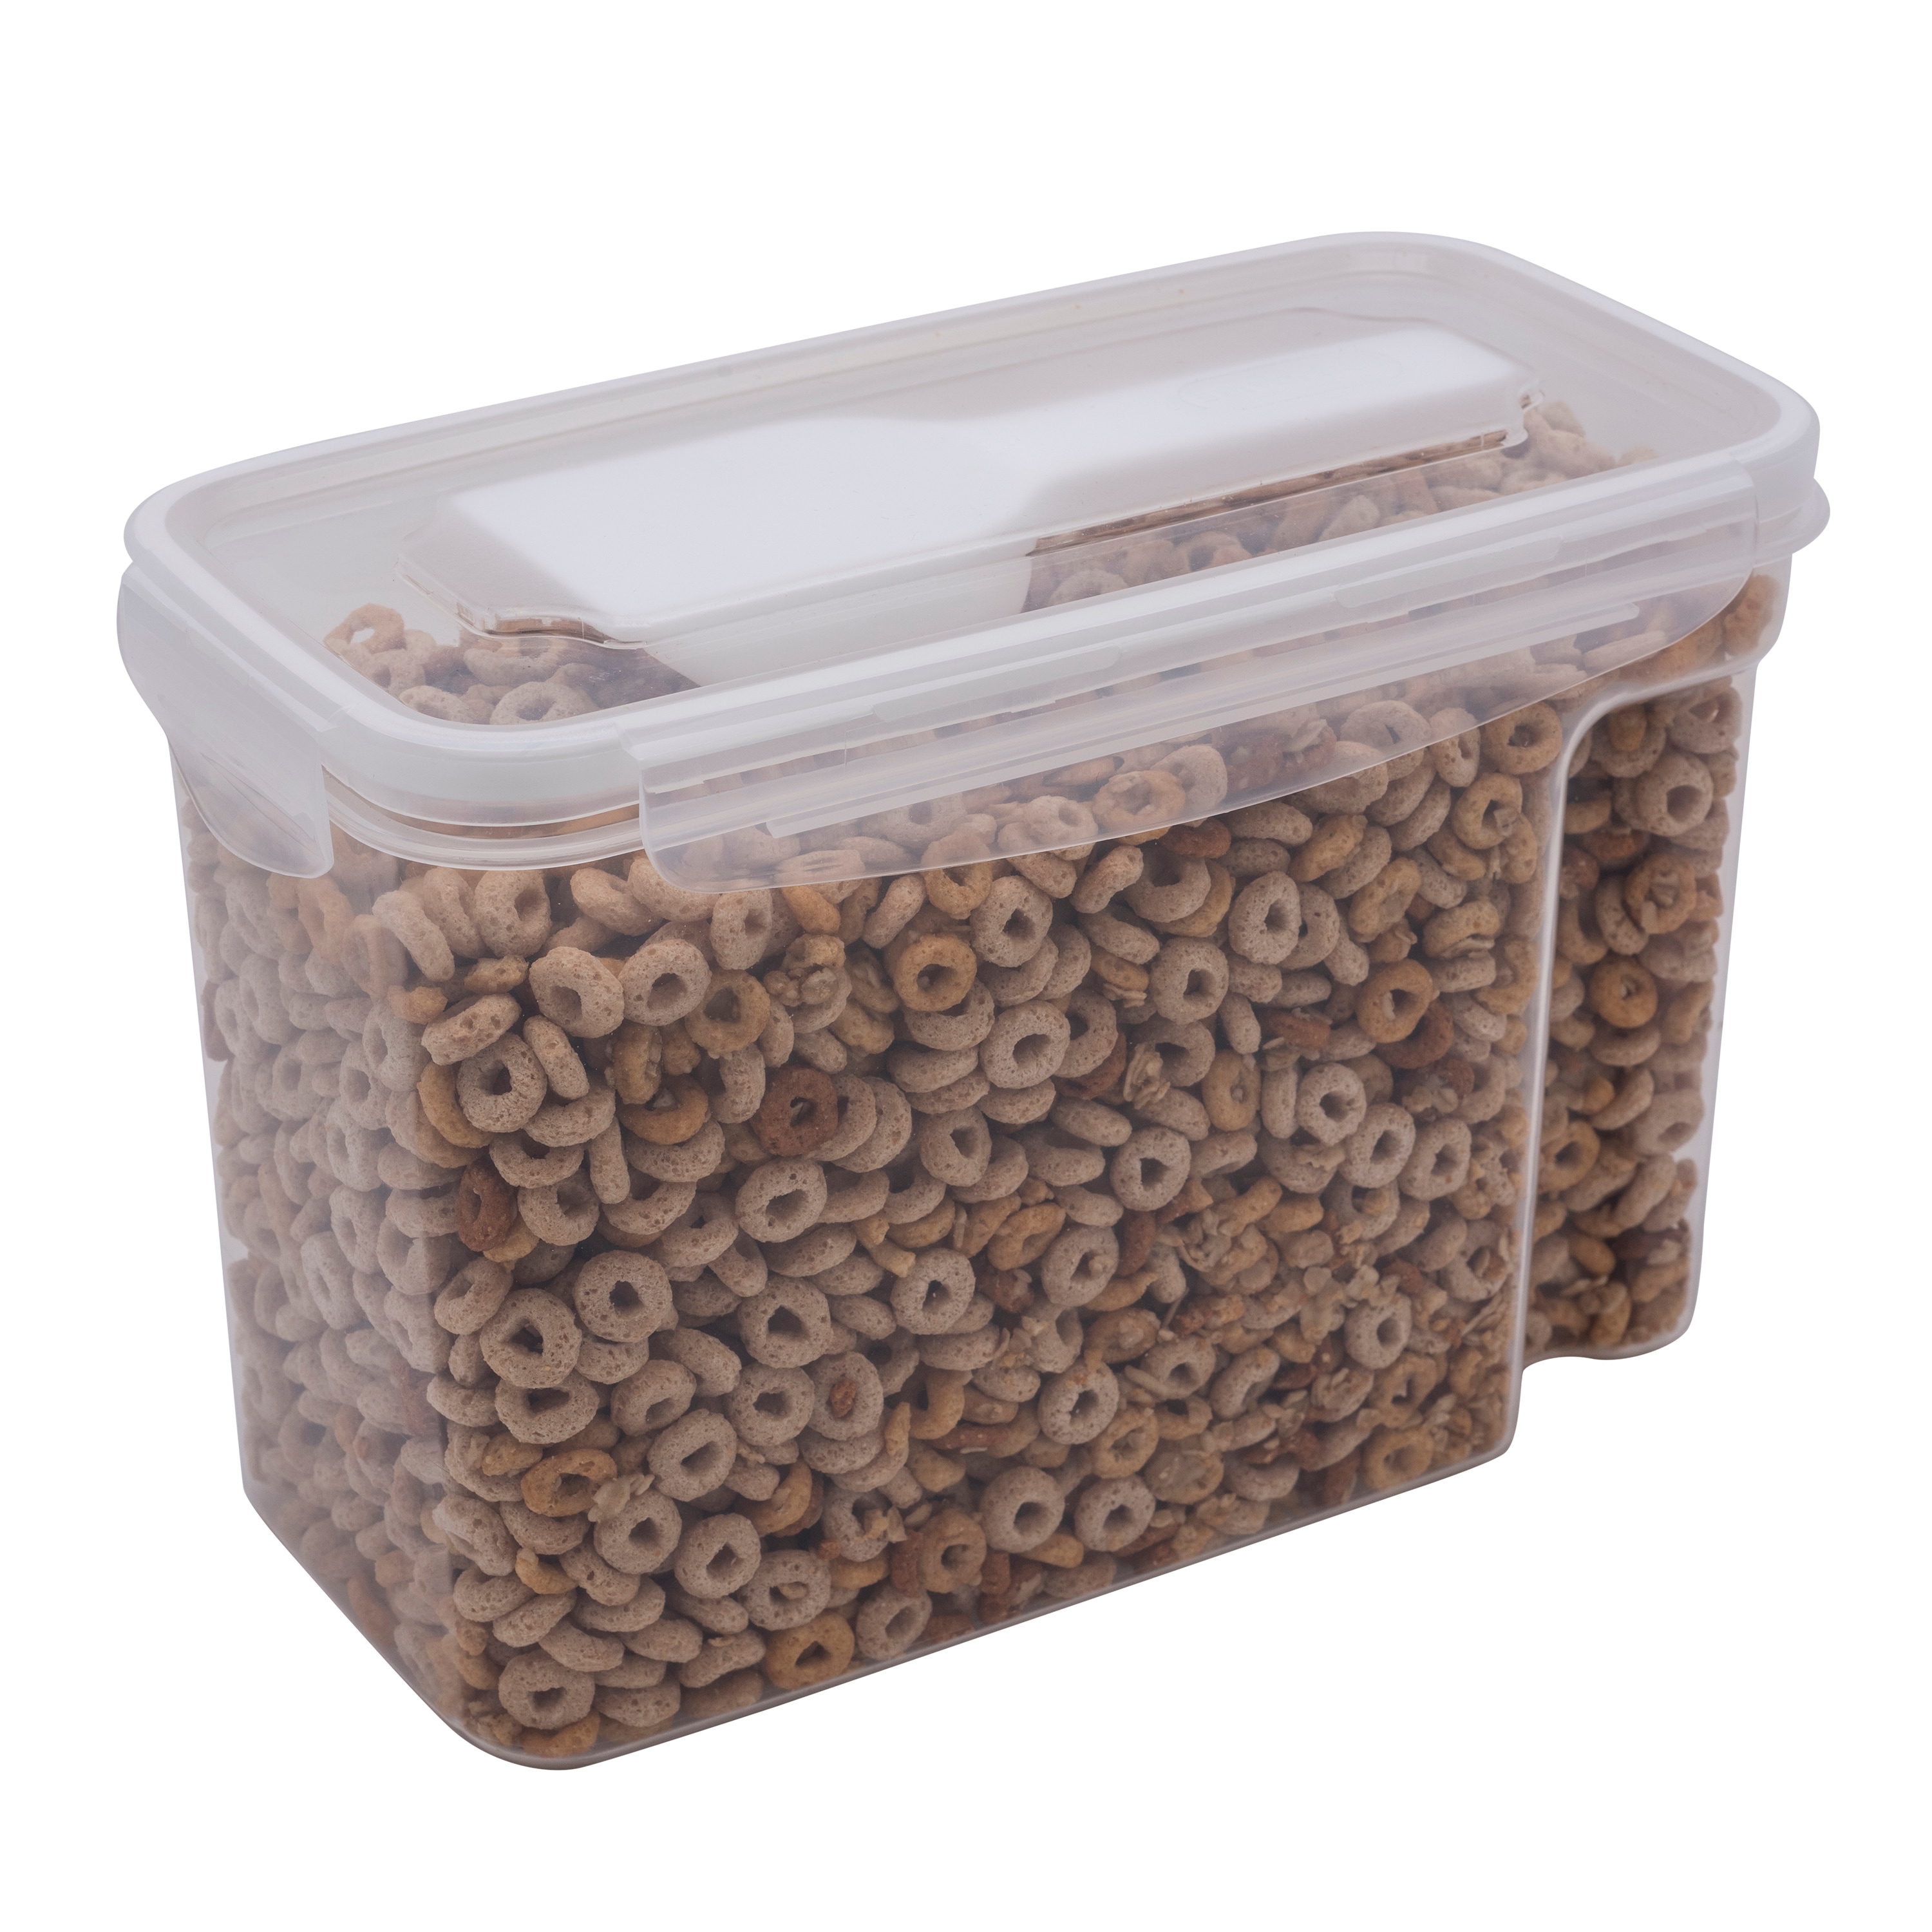 mDesign Airtight Plastic 4.8 Quart Cereal Storage Container, Lid, 2 Pack,  Clear